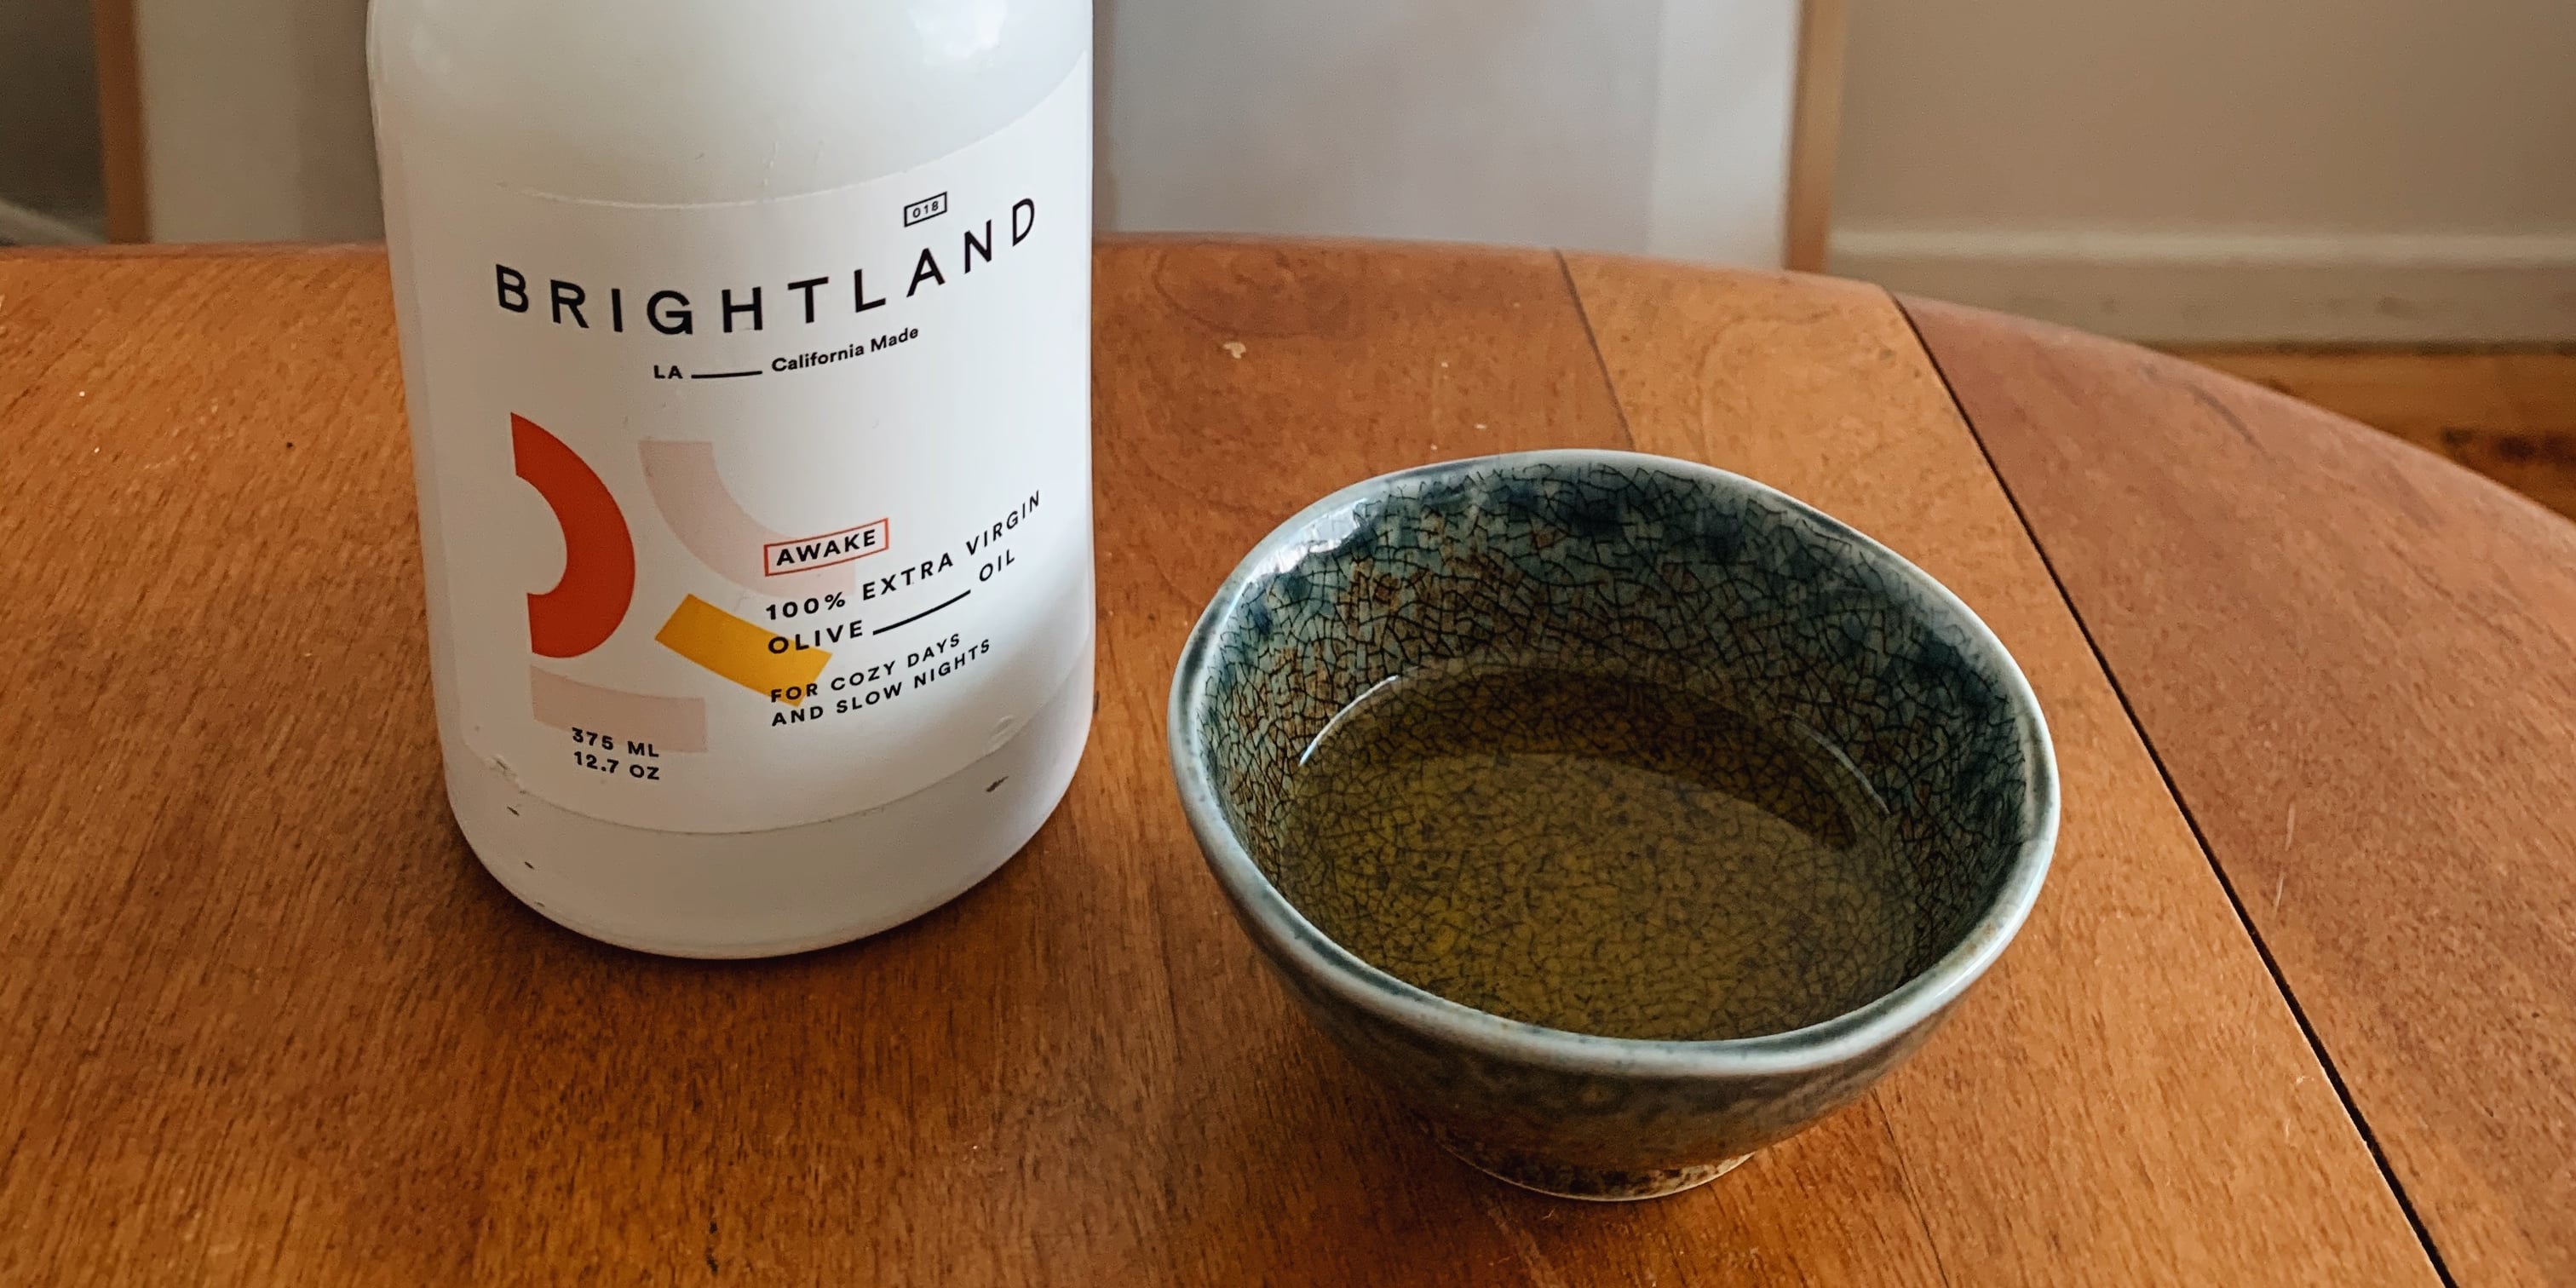 Brightland Olive Oil review